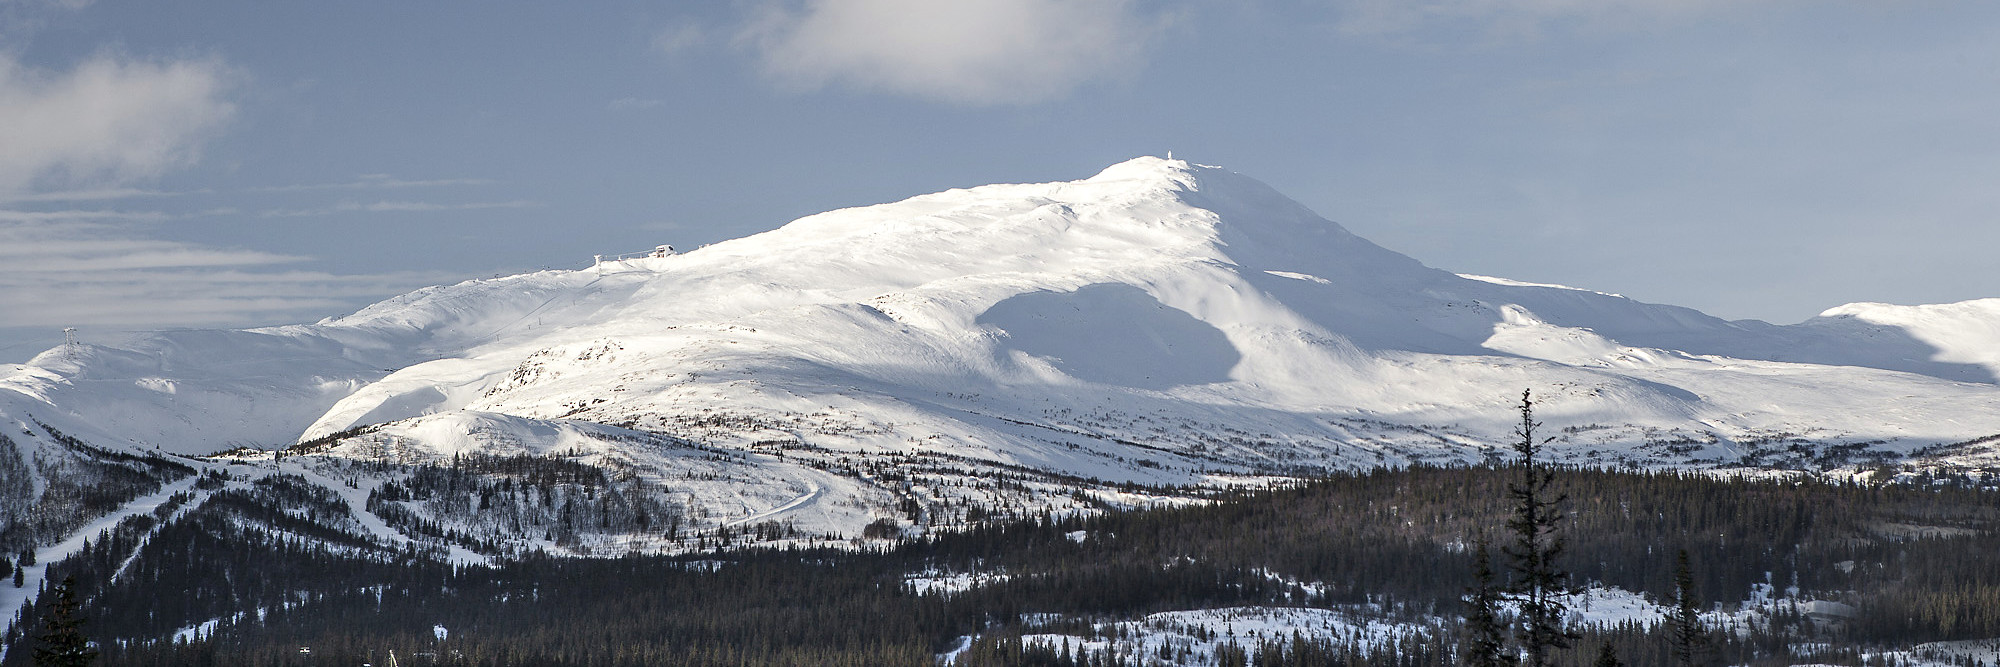 Swedish ski resort Åre will host the 2017 FIS FIS Junior Alpine World Ski Championships as a test event for the main edition two years later ©Getty Images